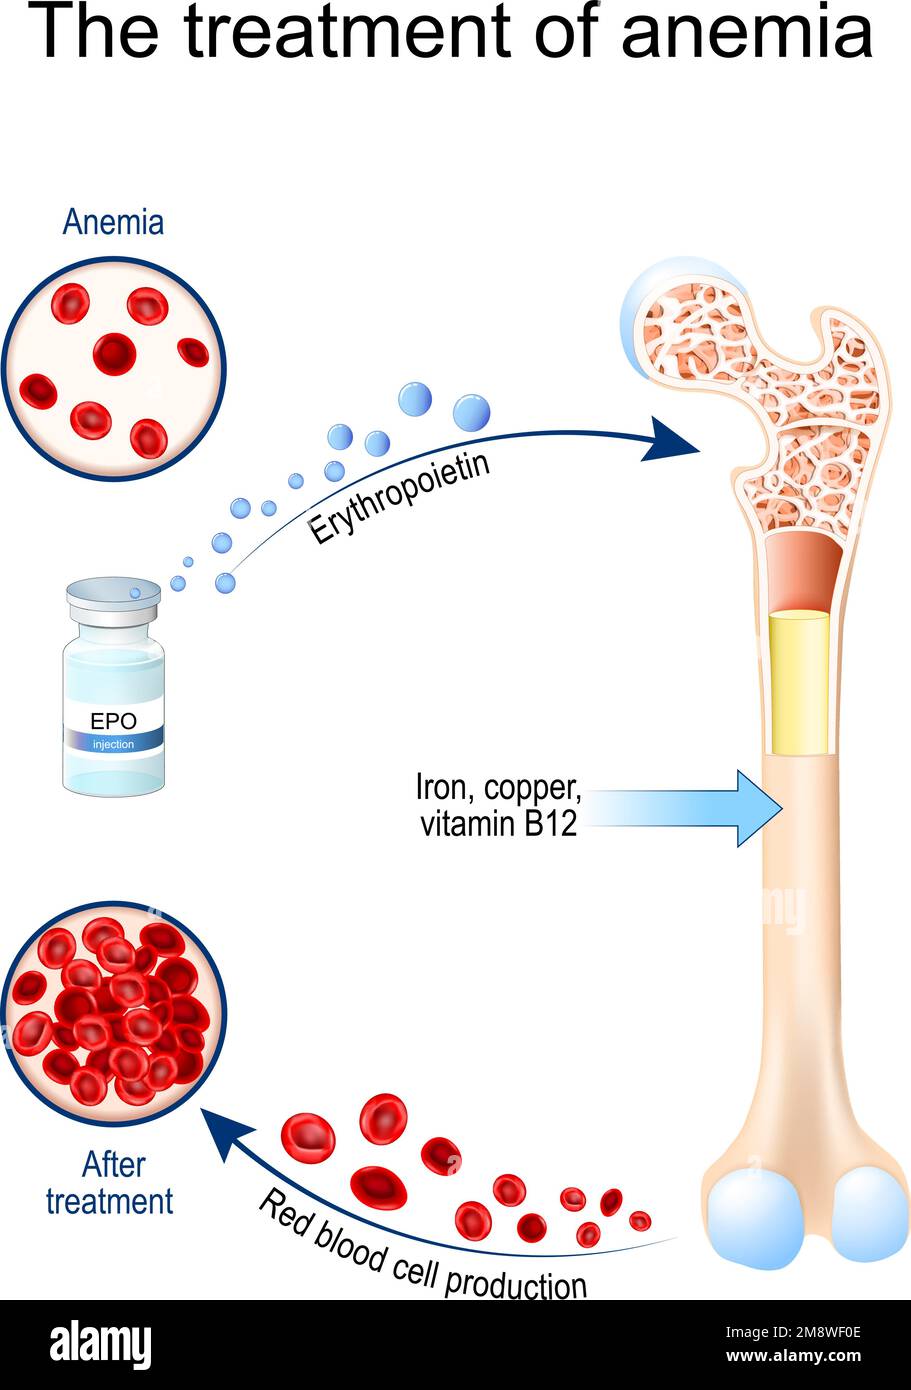 Erythropoietin and treatment of anemia. Glycoprotein cytokine that stimulates red blood cell production. erythropoiesis. Vial with EPO. anemia Stock Vector